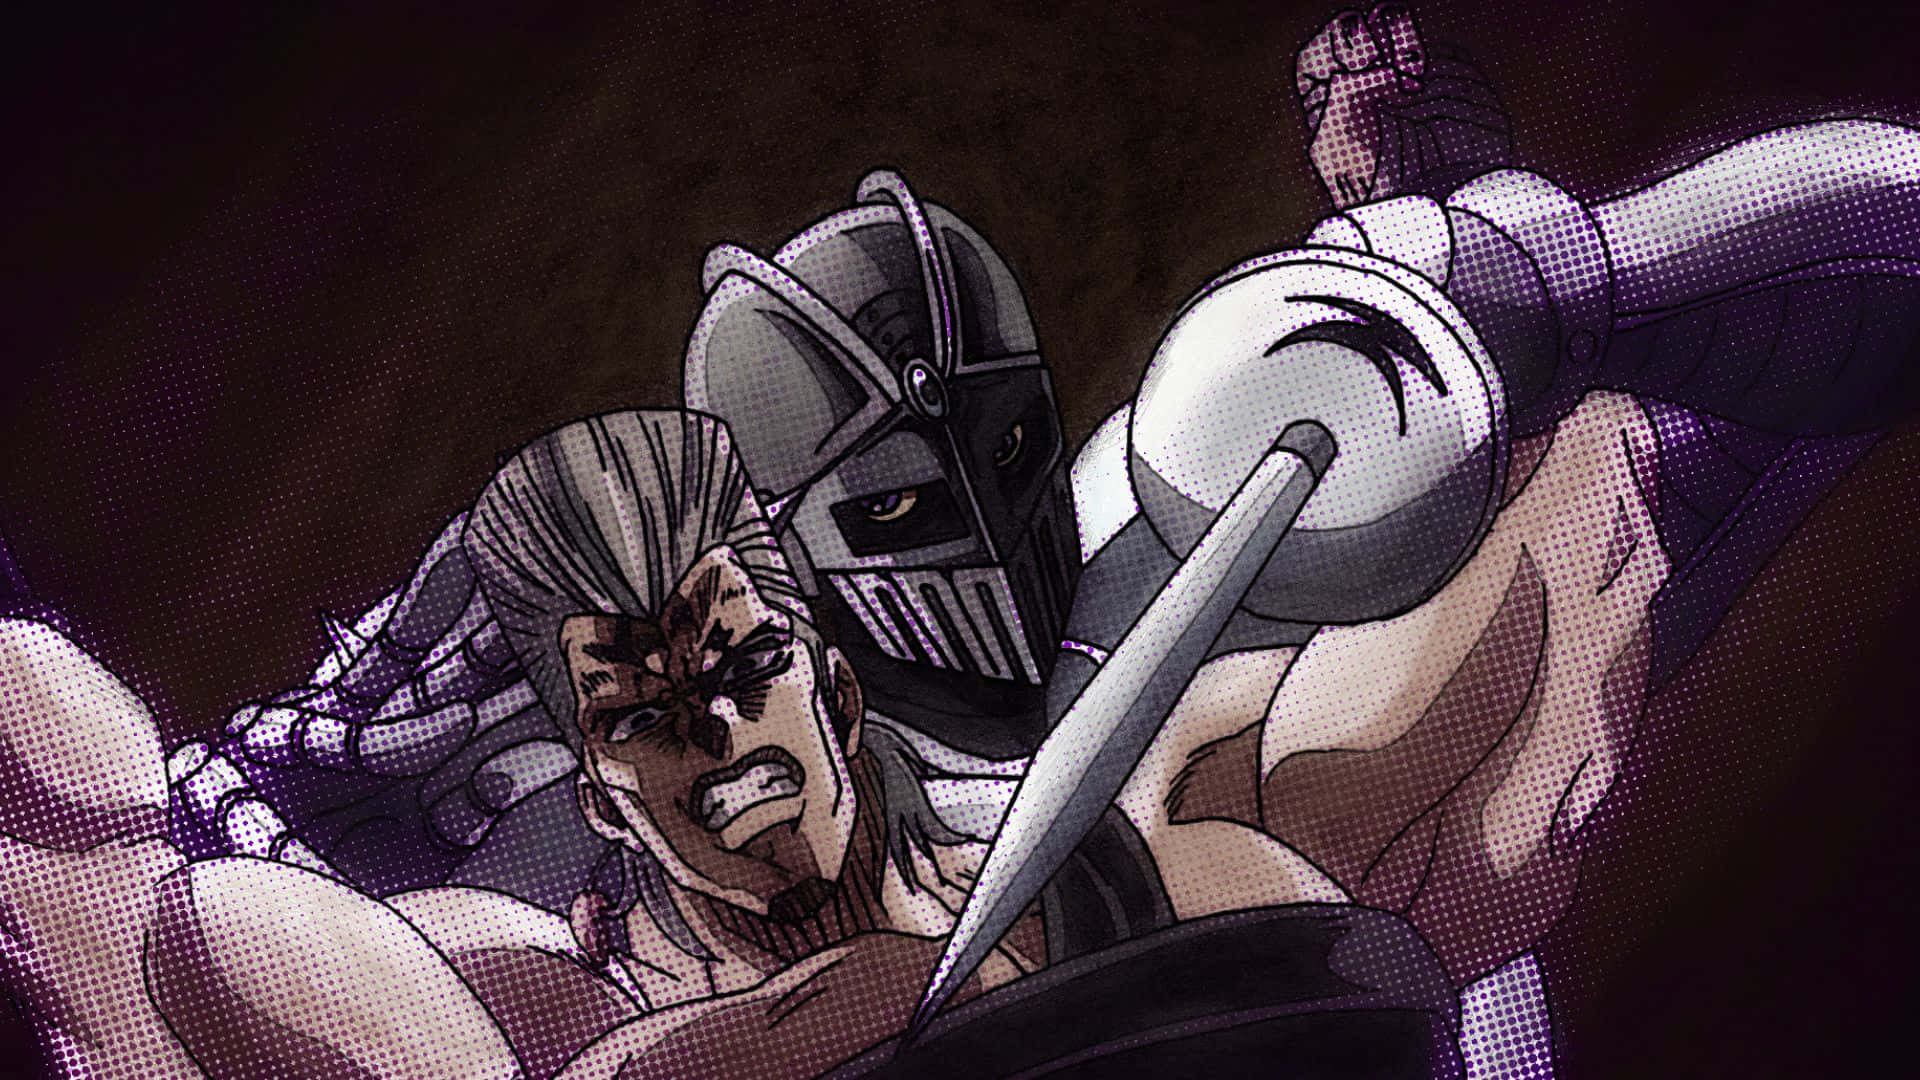 Jean Pierre Polnareff - The Iconic Silver Chariot Stand User in Action Wallpaper